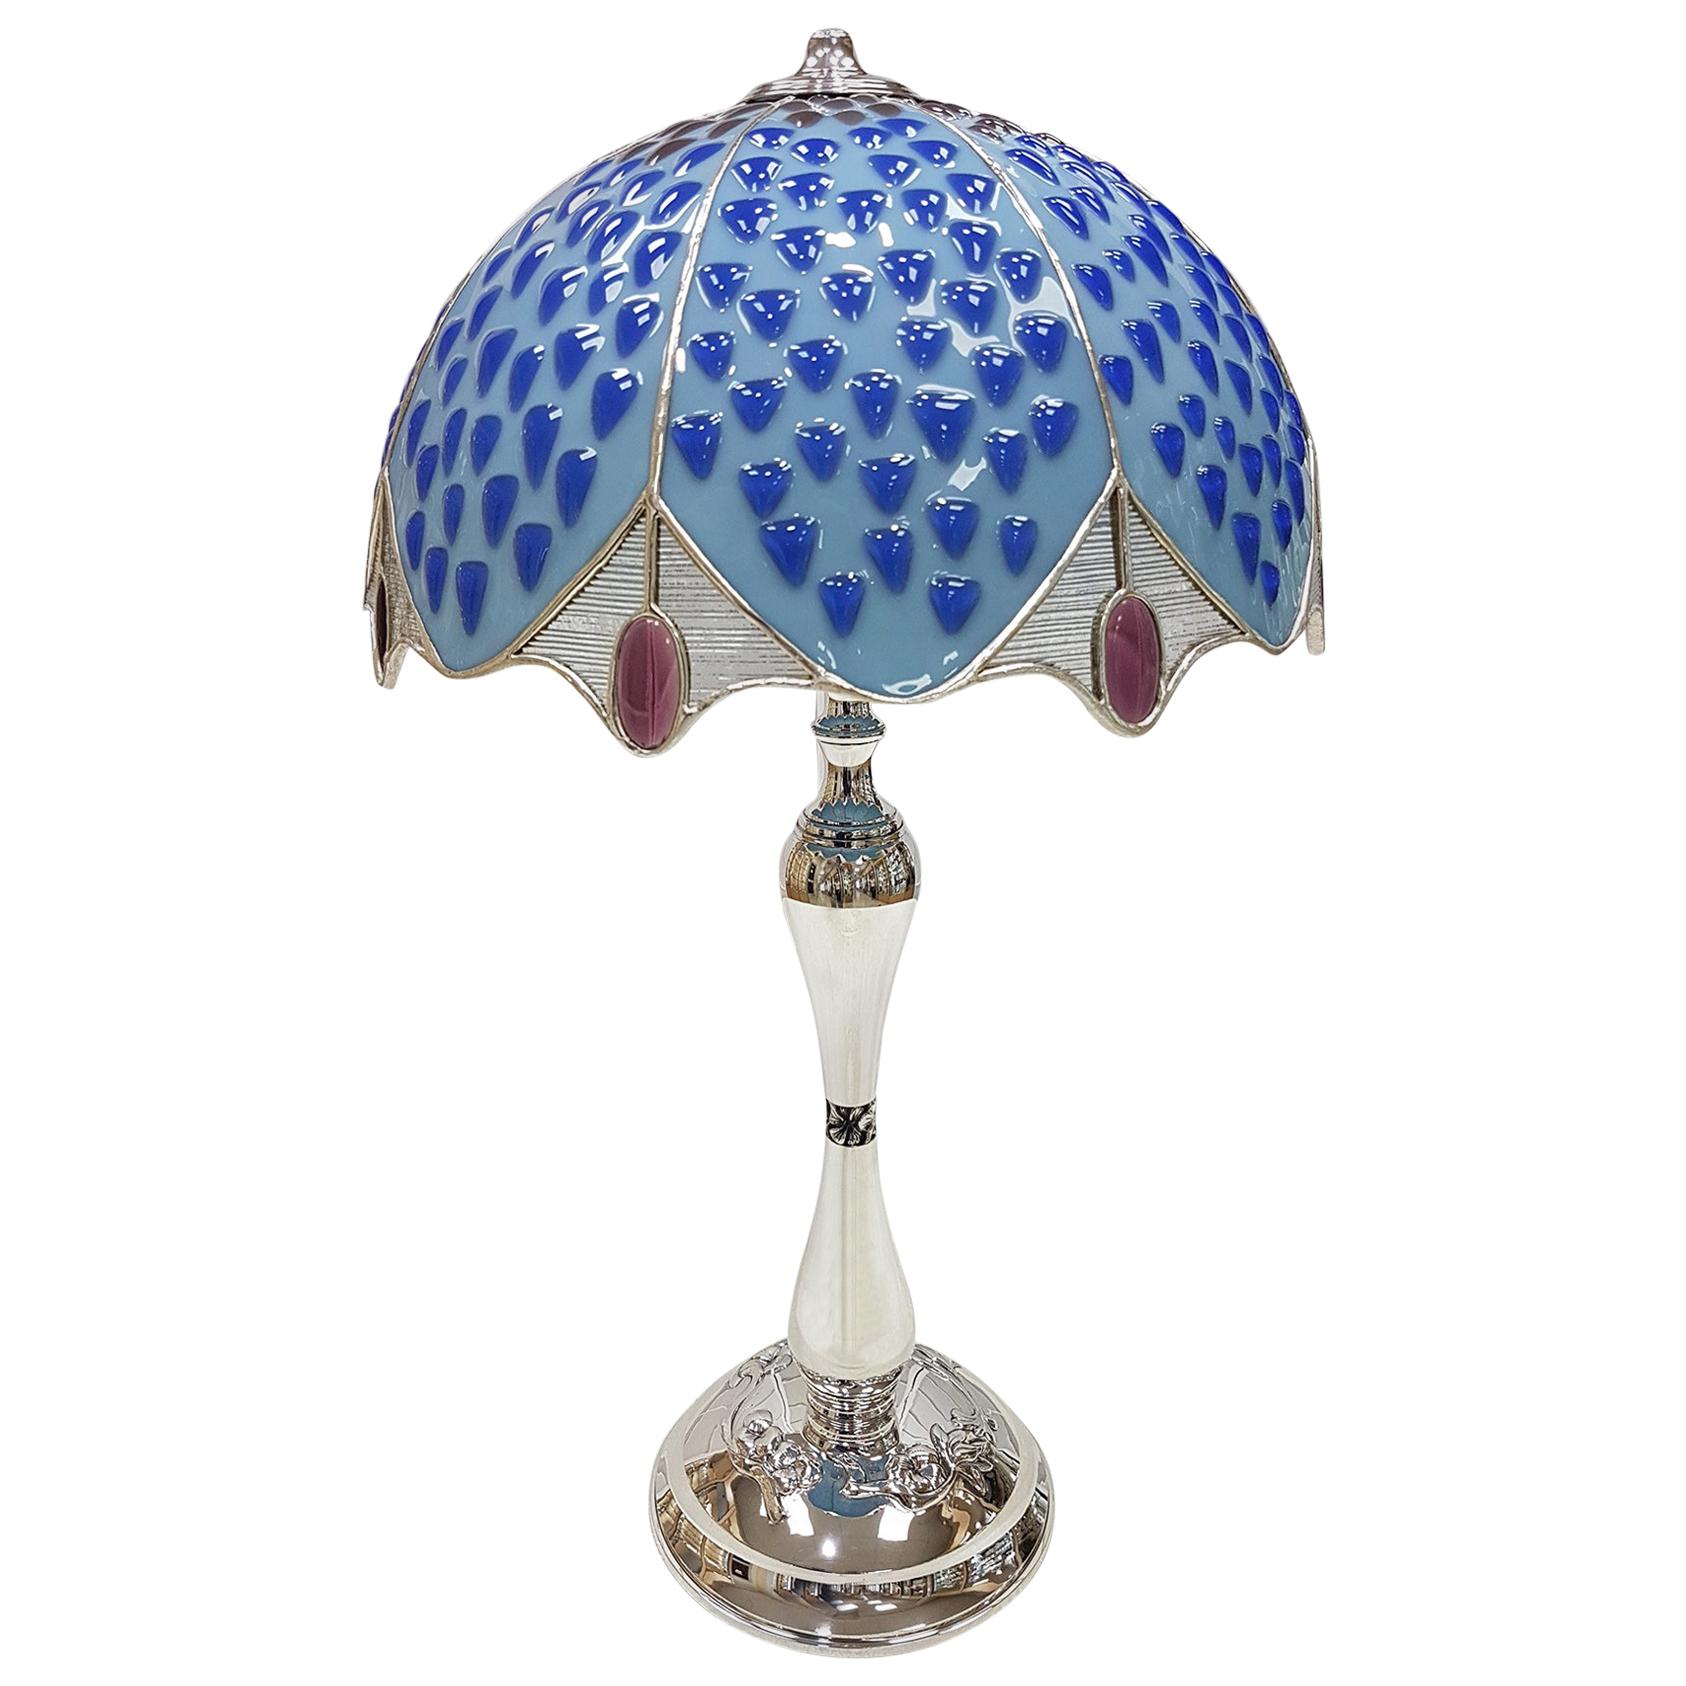 20th Italian Century Sterling Silver Table Lamp with Polychrome Glass Hat